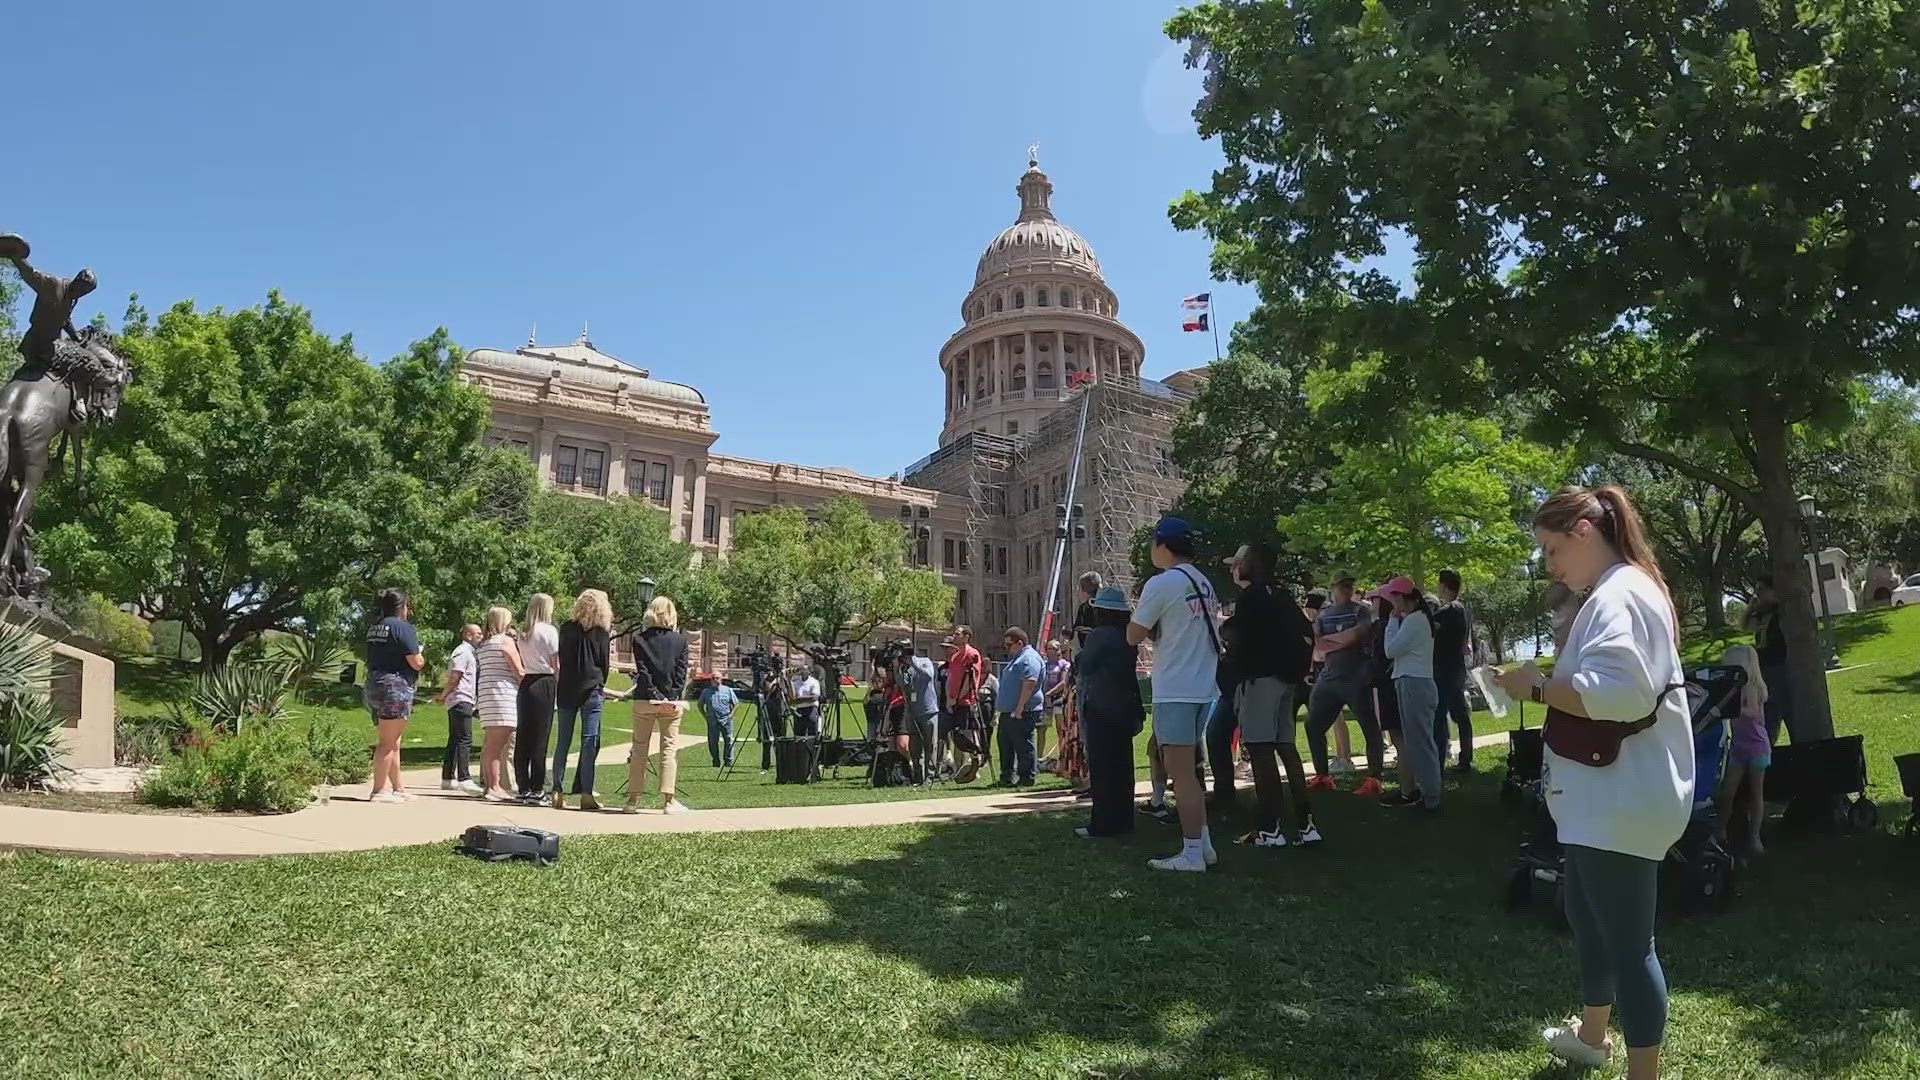 The lawmakers addressed big issues for Texans this Legislative session, including abortion access and LGBTQ+ rights.